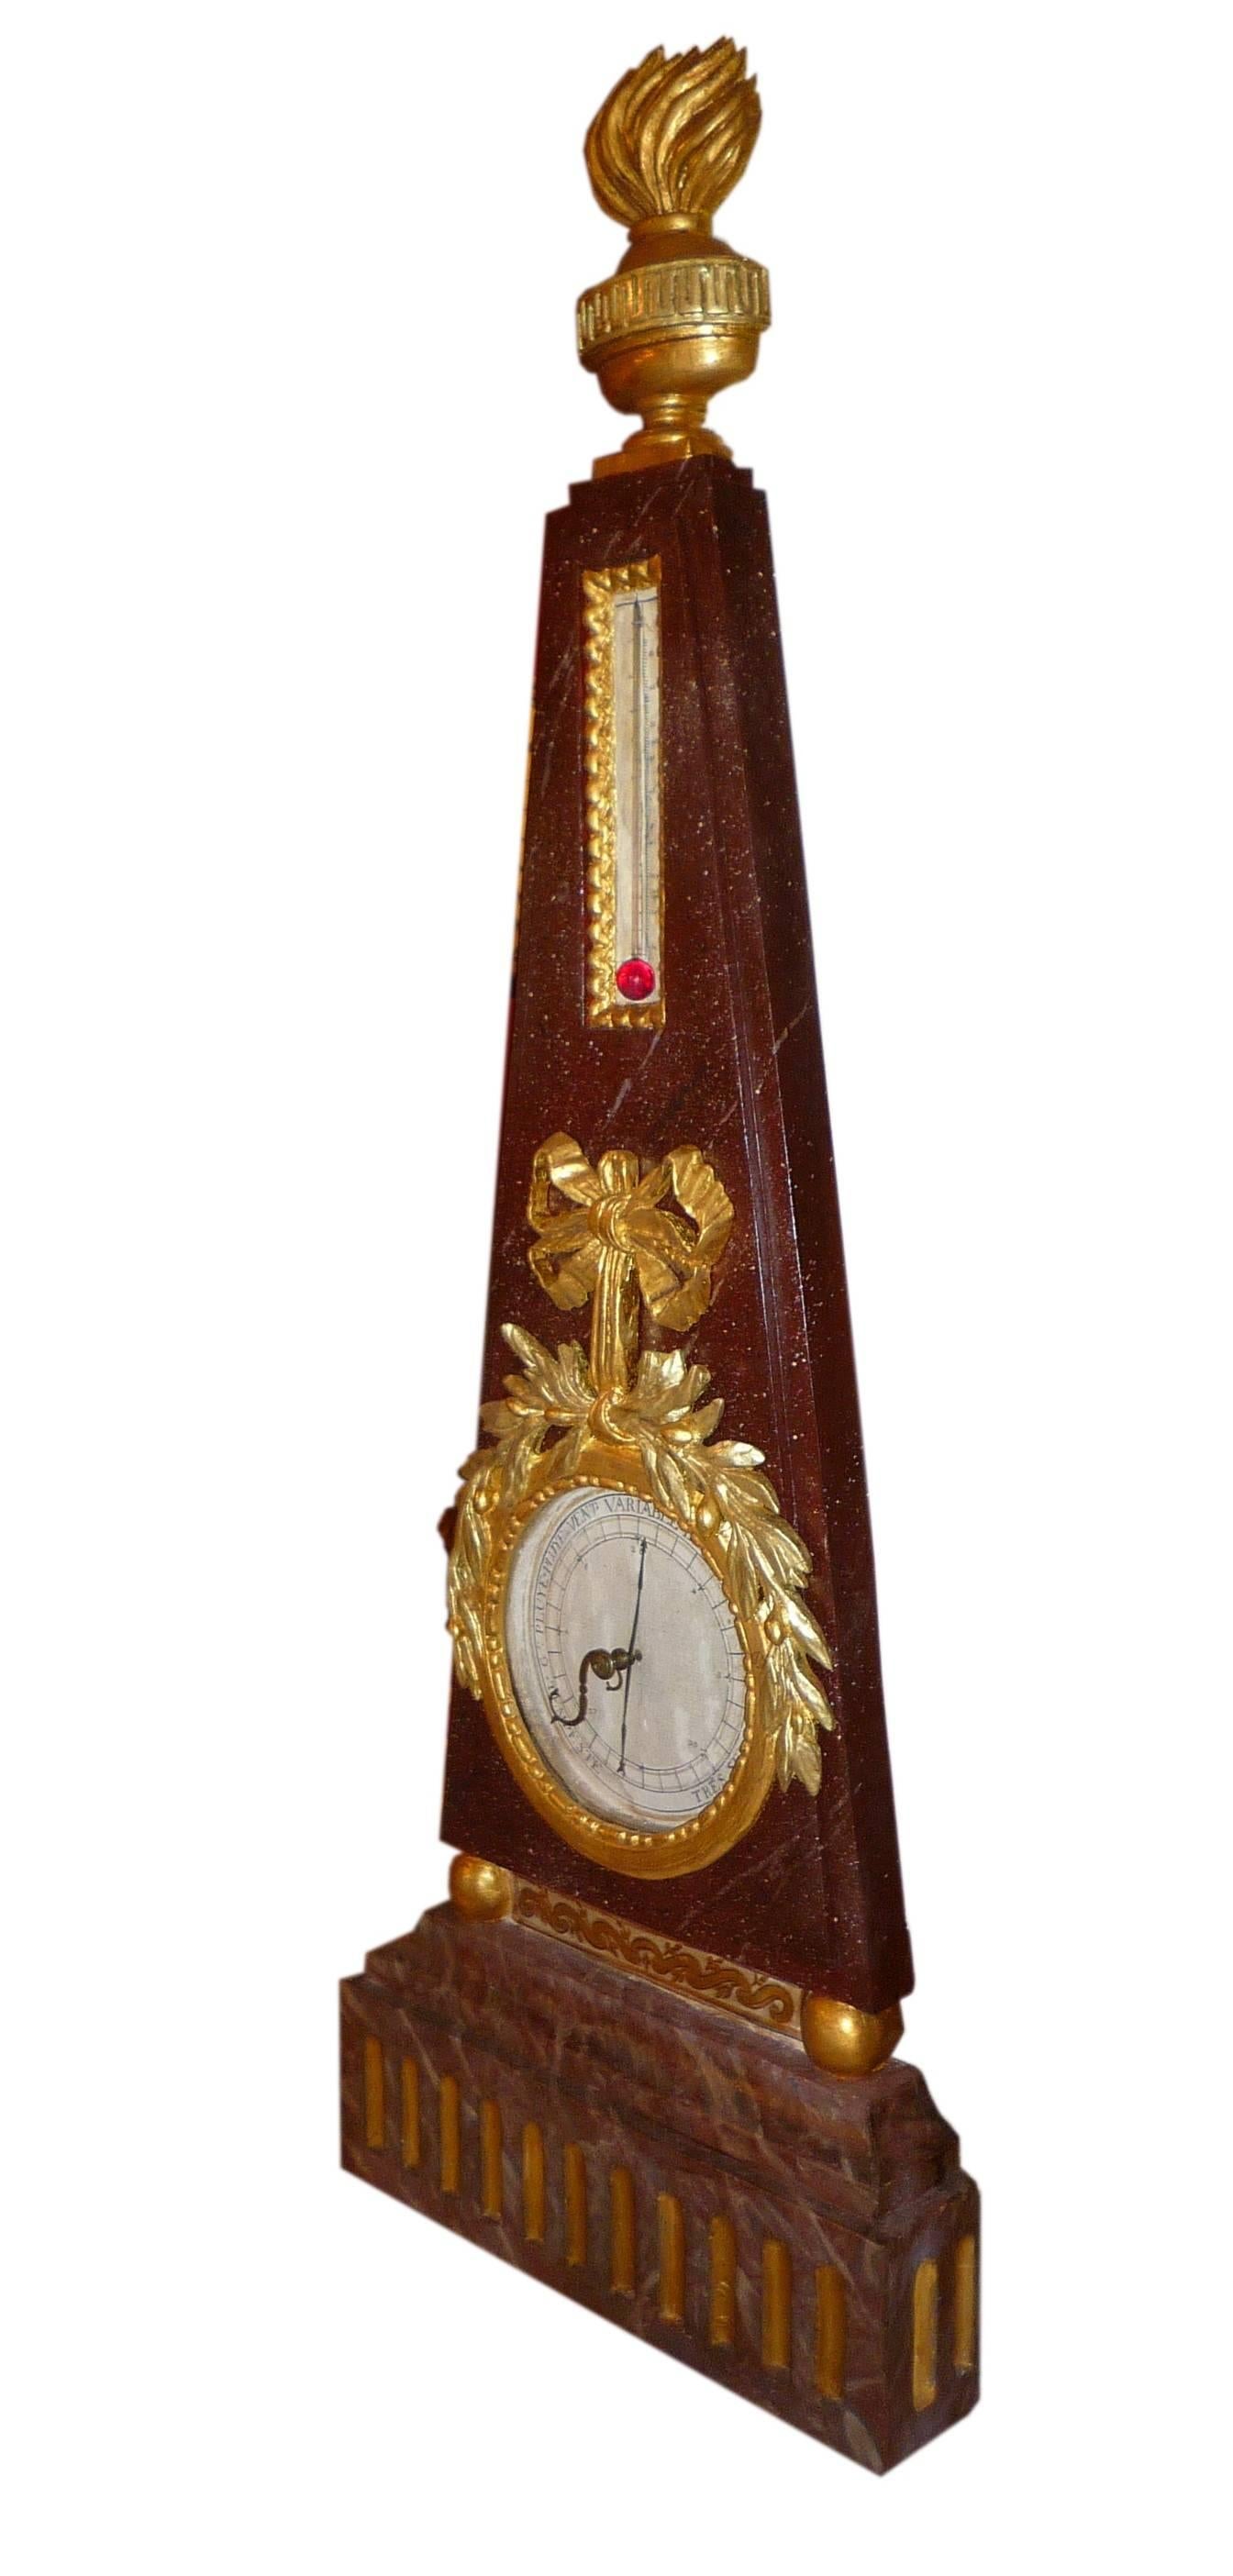 A French Louis XVI period painted wood imitating porphyry and giltwood (two colors) barometer, with thermometer, circa 1780.
Does not work anymore.